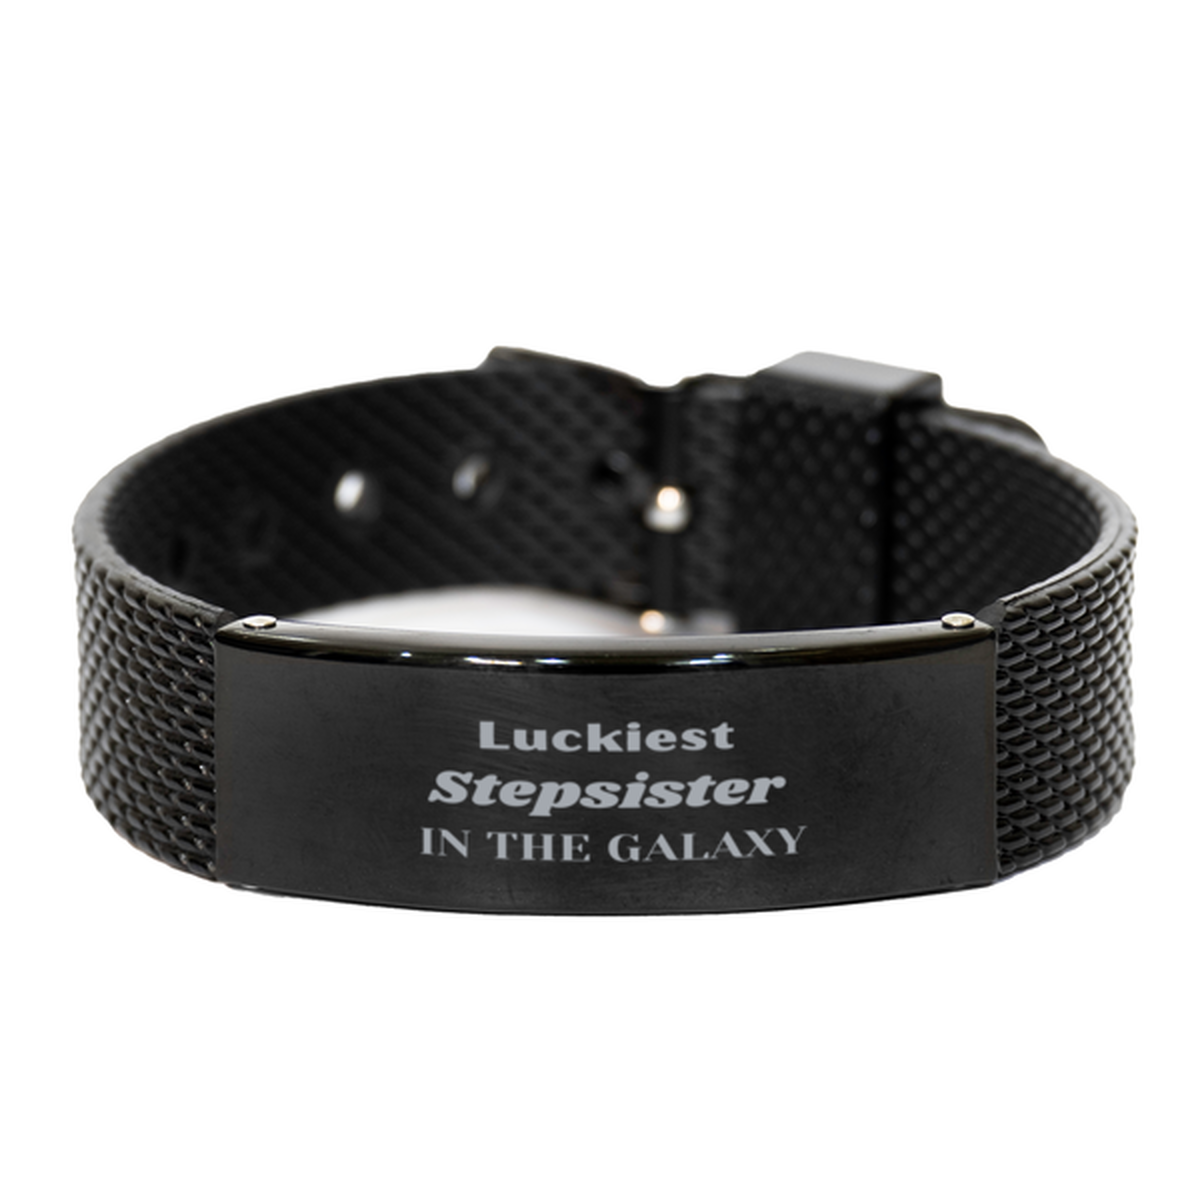 Luckiest Stepsister in the Galaxy, To My Stepsister Engraved Gifts, Christmas Stepsister Black Shark Mesh Bracelet Gifts, X-mas Birthday Unique Gifts For Stepsister Men Women